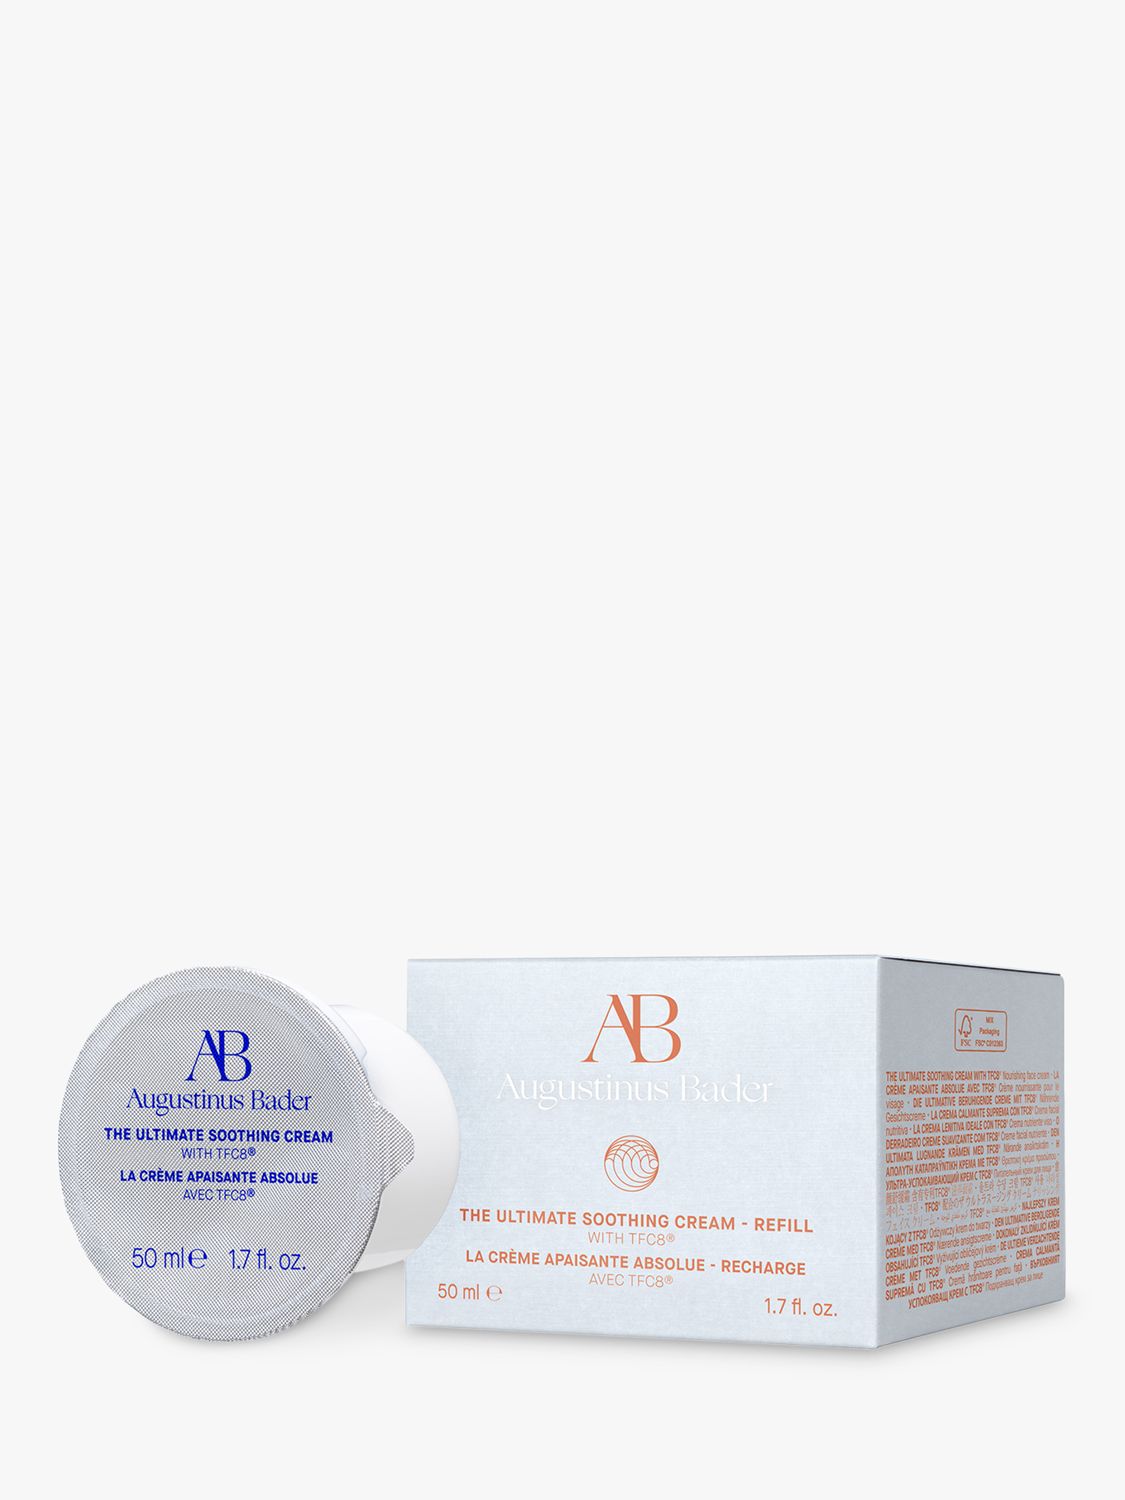 Augustinus Bader The Ultimate Soothing Cream, Refill, 50ml at John